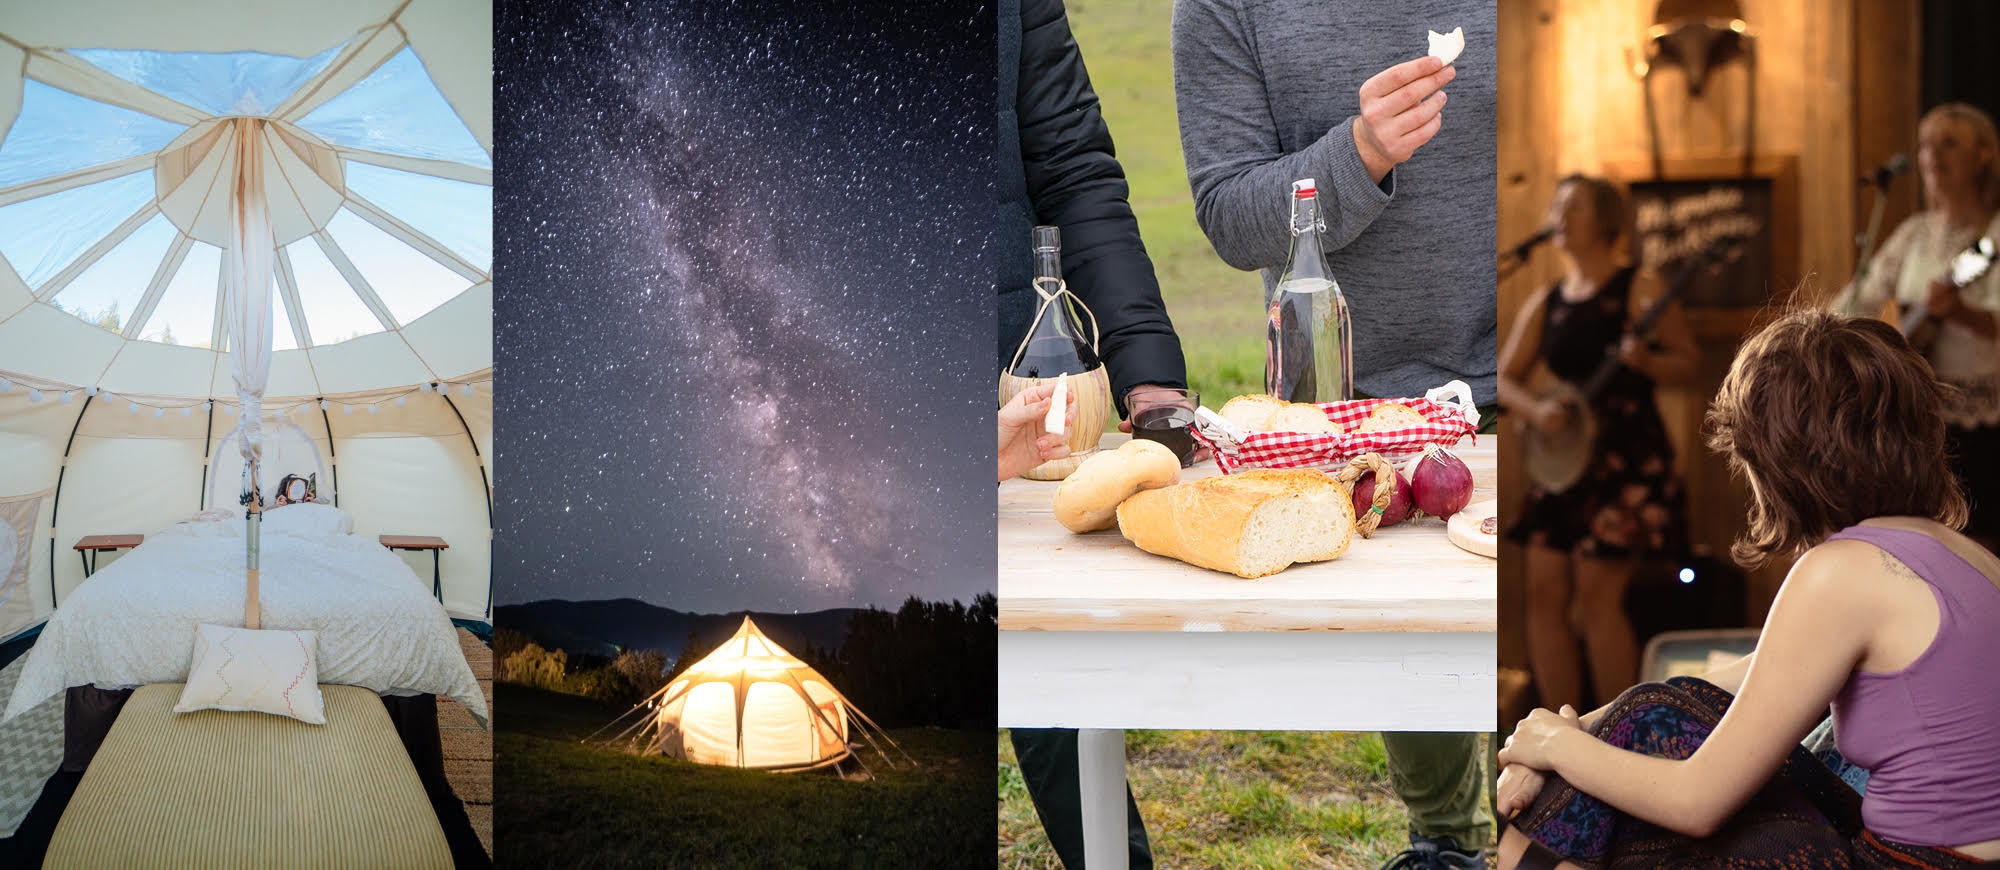 Glamping tent, milky way and delicious food.